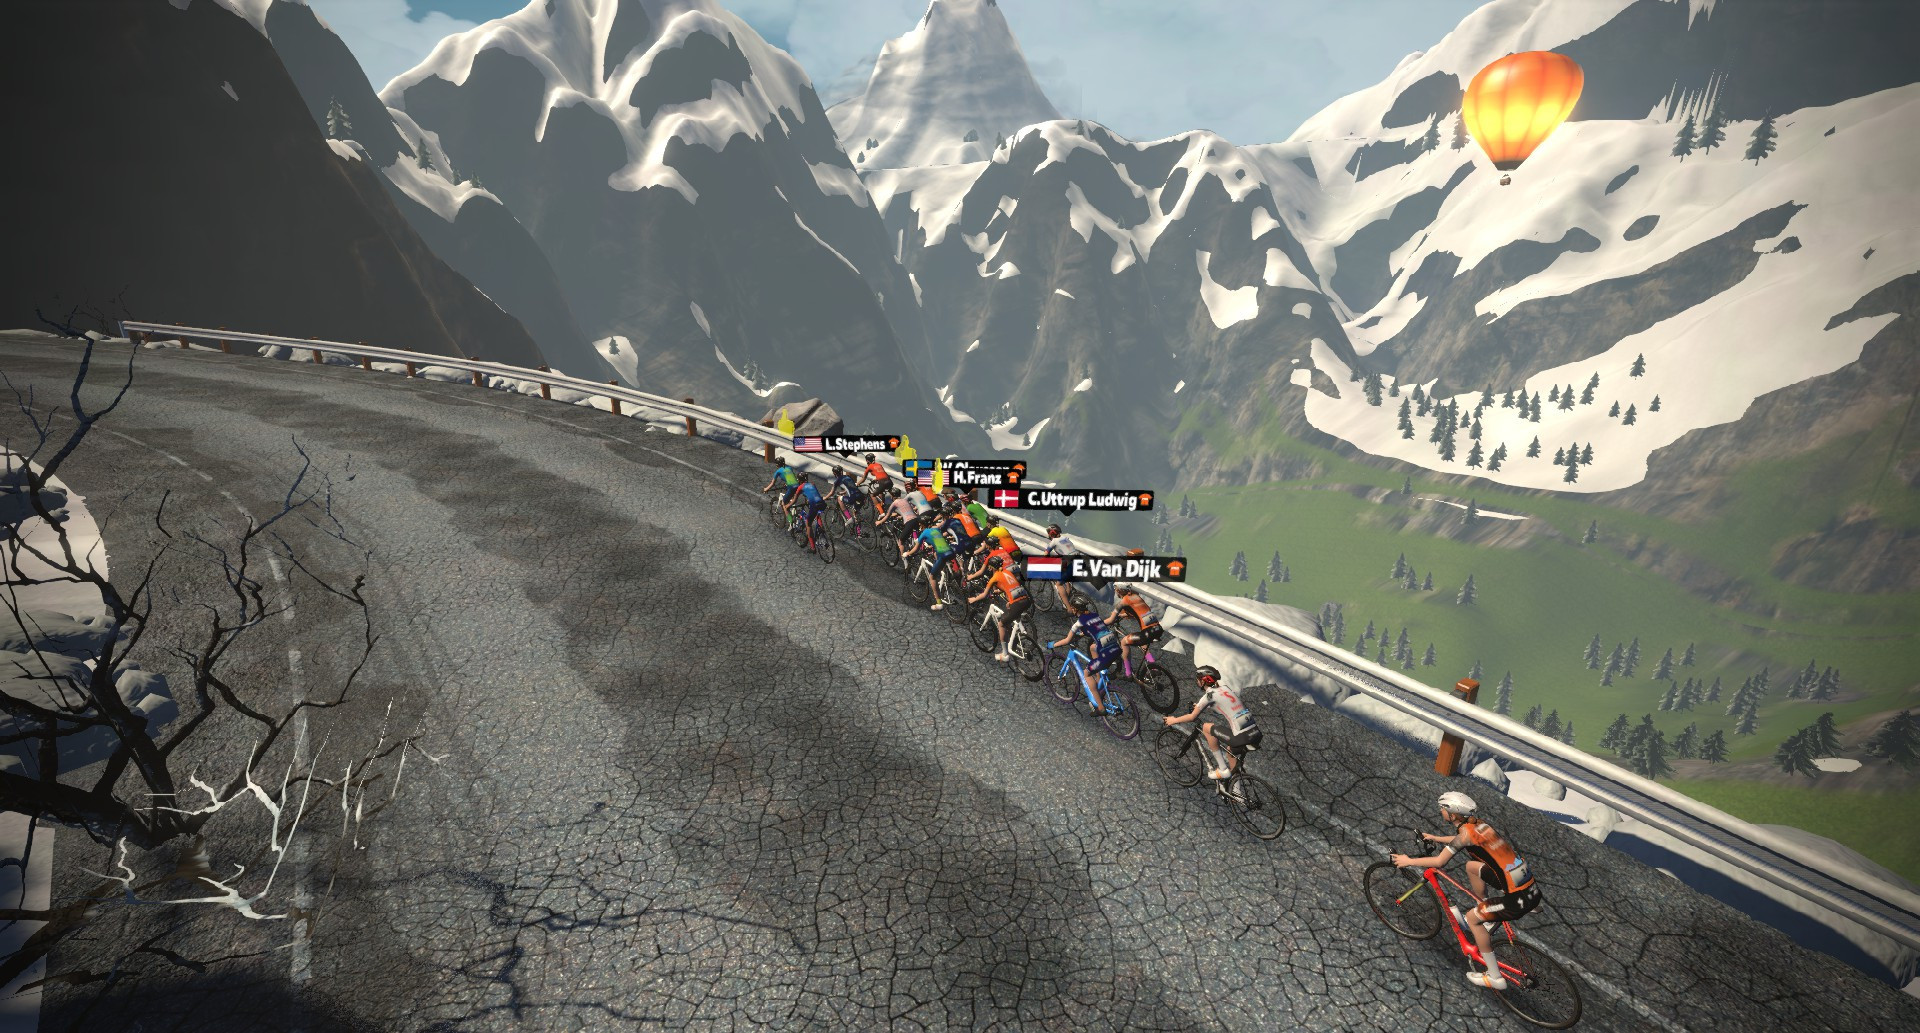 Zwift events have enjoyed a surge in popularity among professional and amateur cyclists ©Zwift